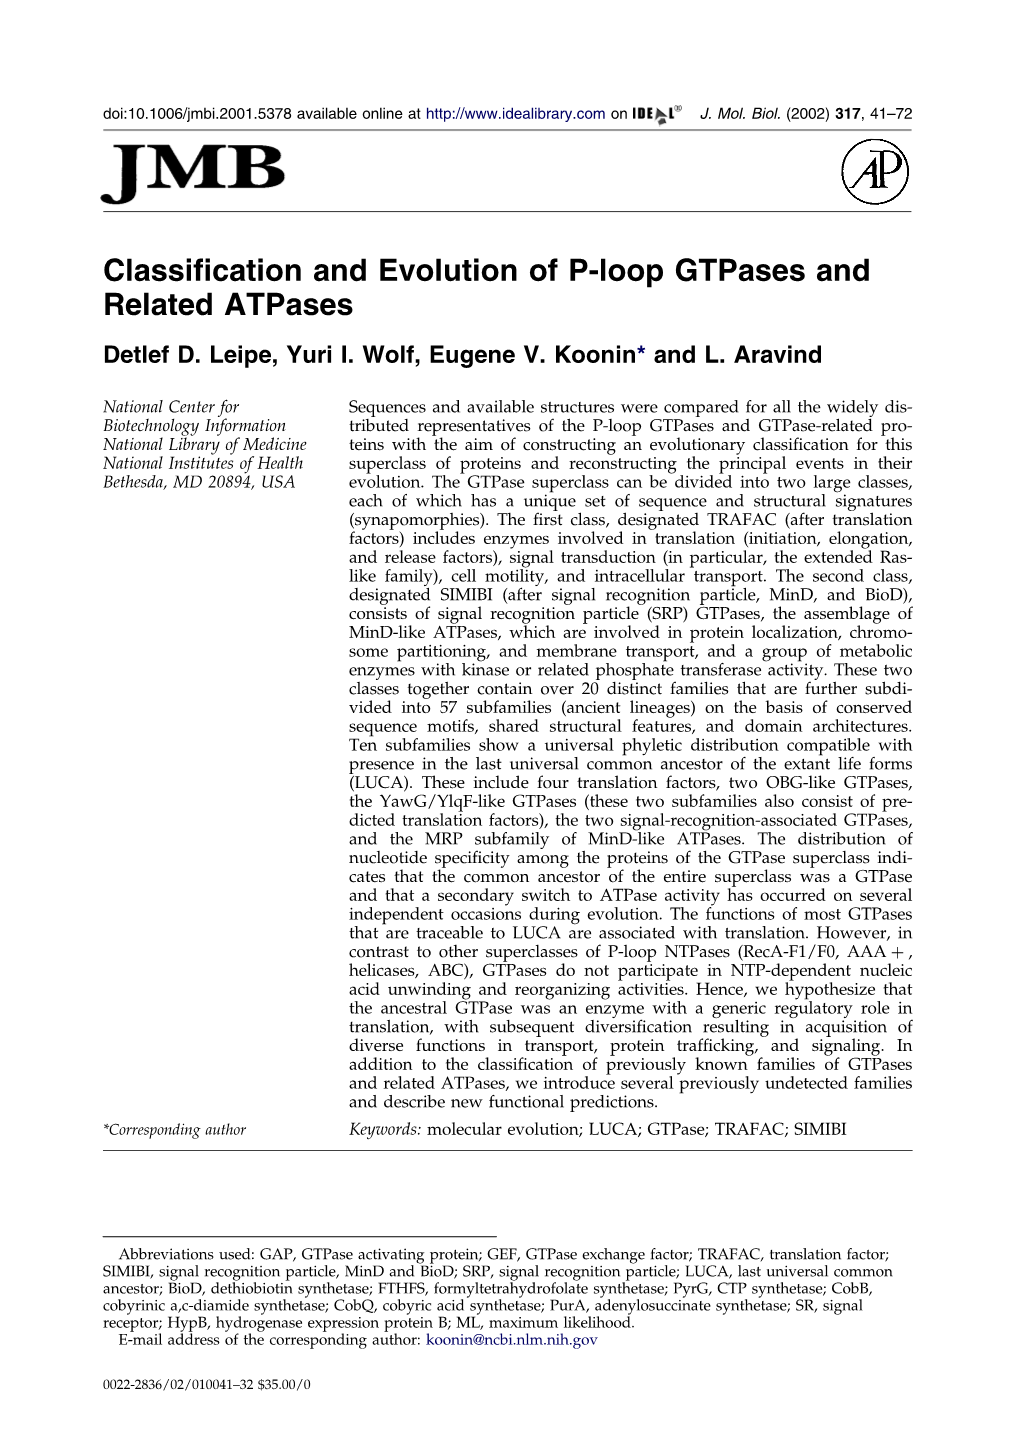 Classification and Evolution of P-Loop Gtpases and Related Atpases Detlefd.Leipe,Yurii.Wolf,Eugenev.Koonin*Andl.Aravind